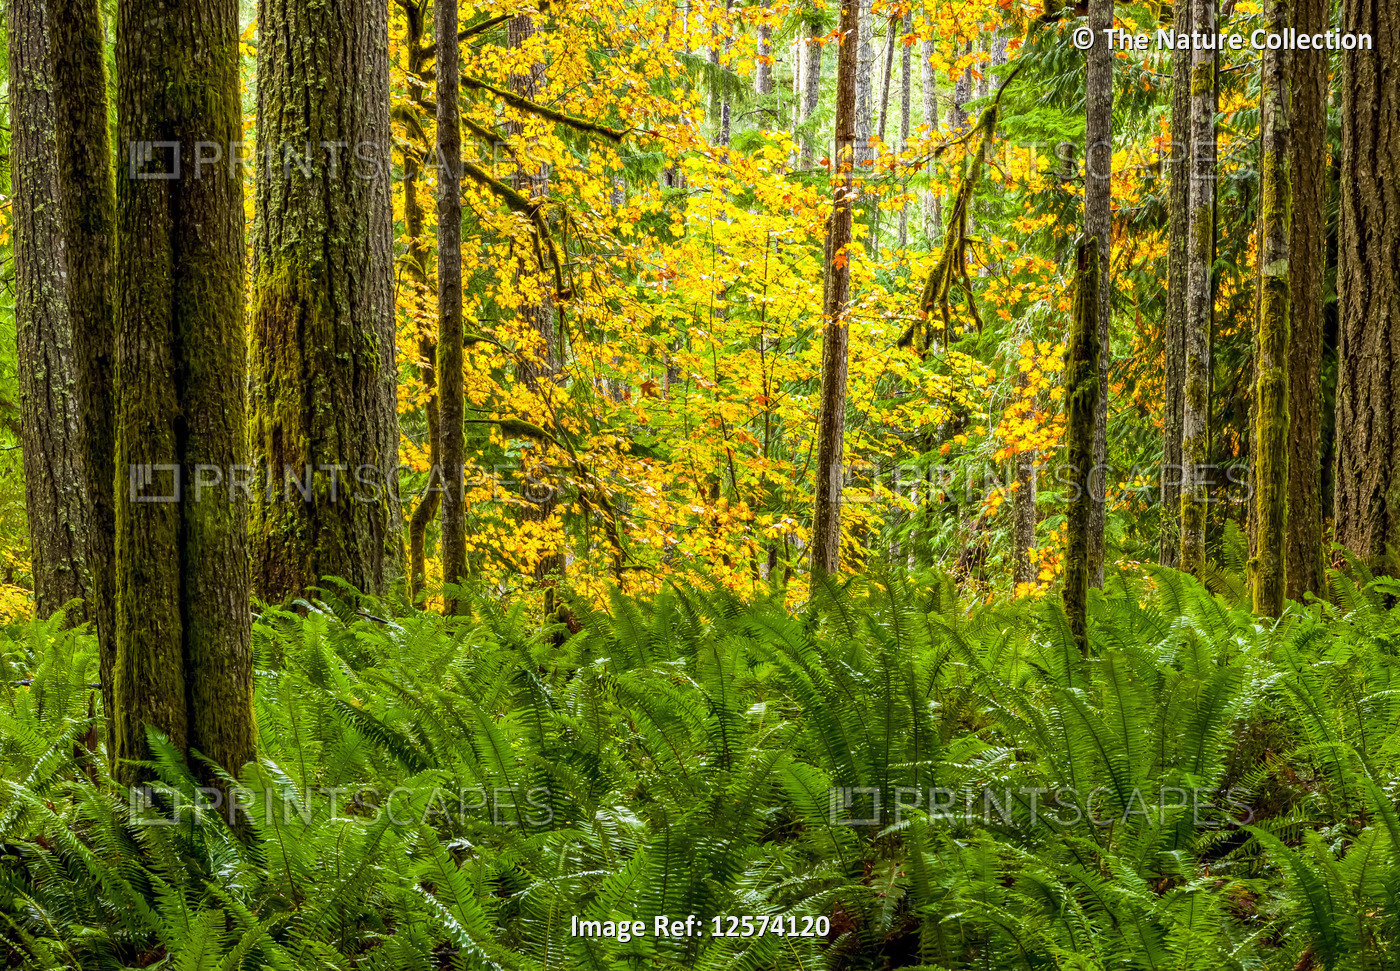 Autumn coloured foliage in a rainforest with ferns growing in the understory; ...